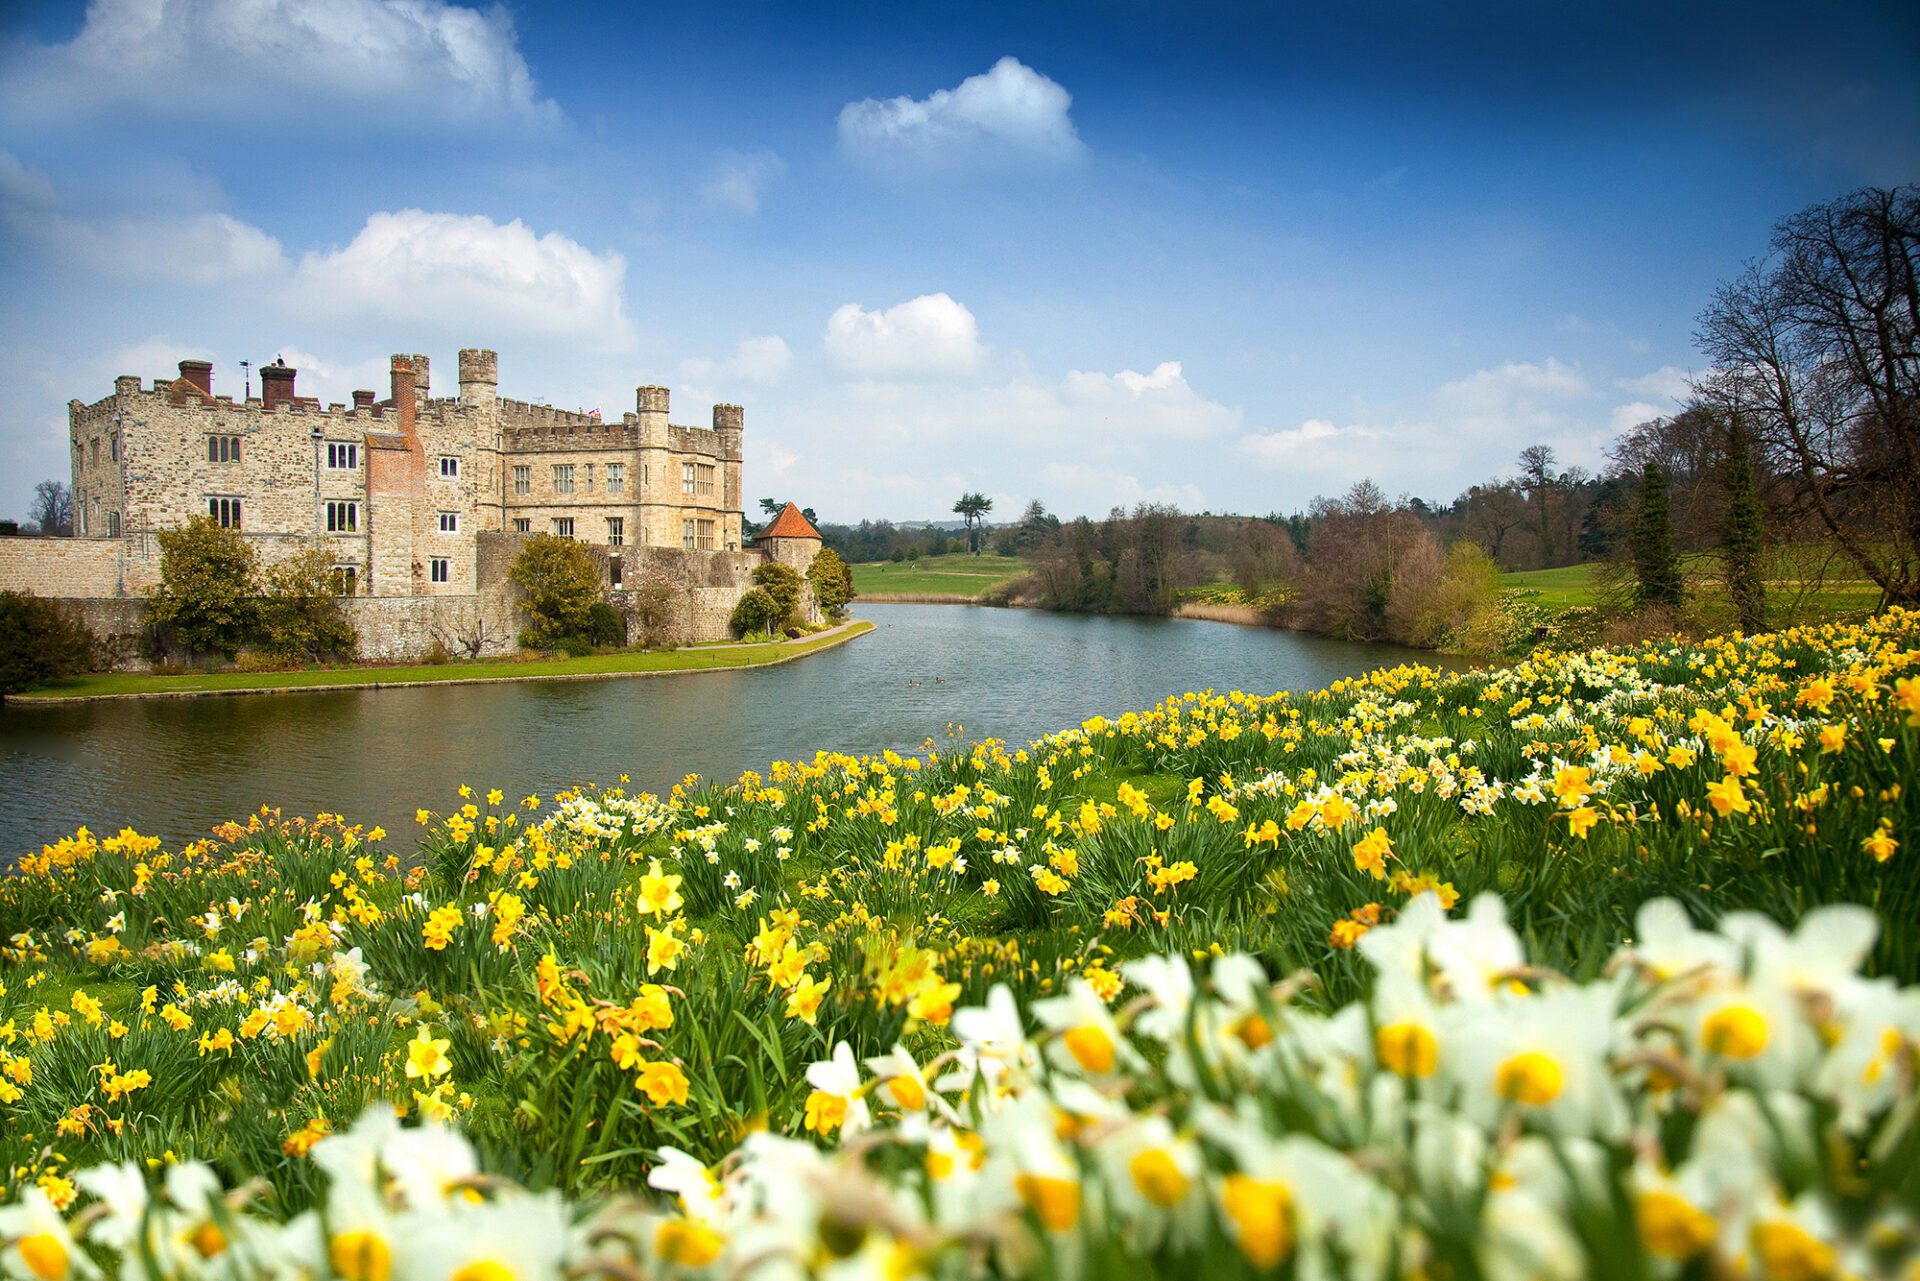 Castle surrounded by moat and flowers - darling daffodil walks